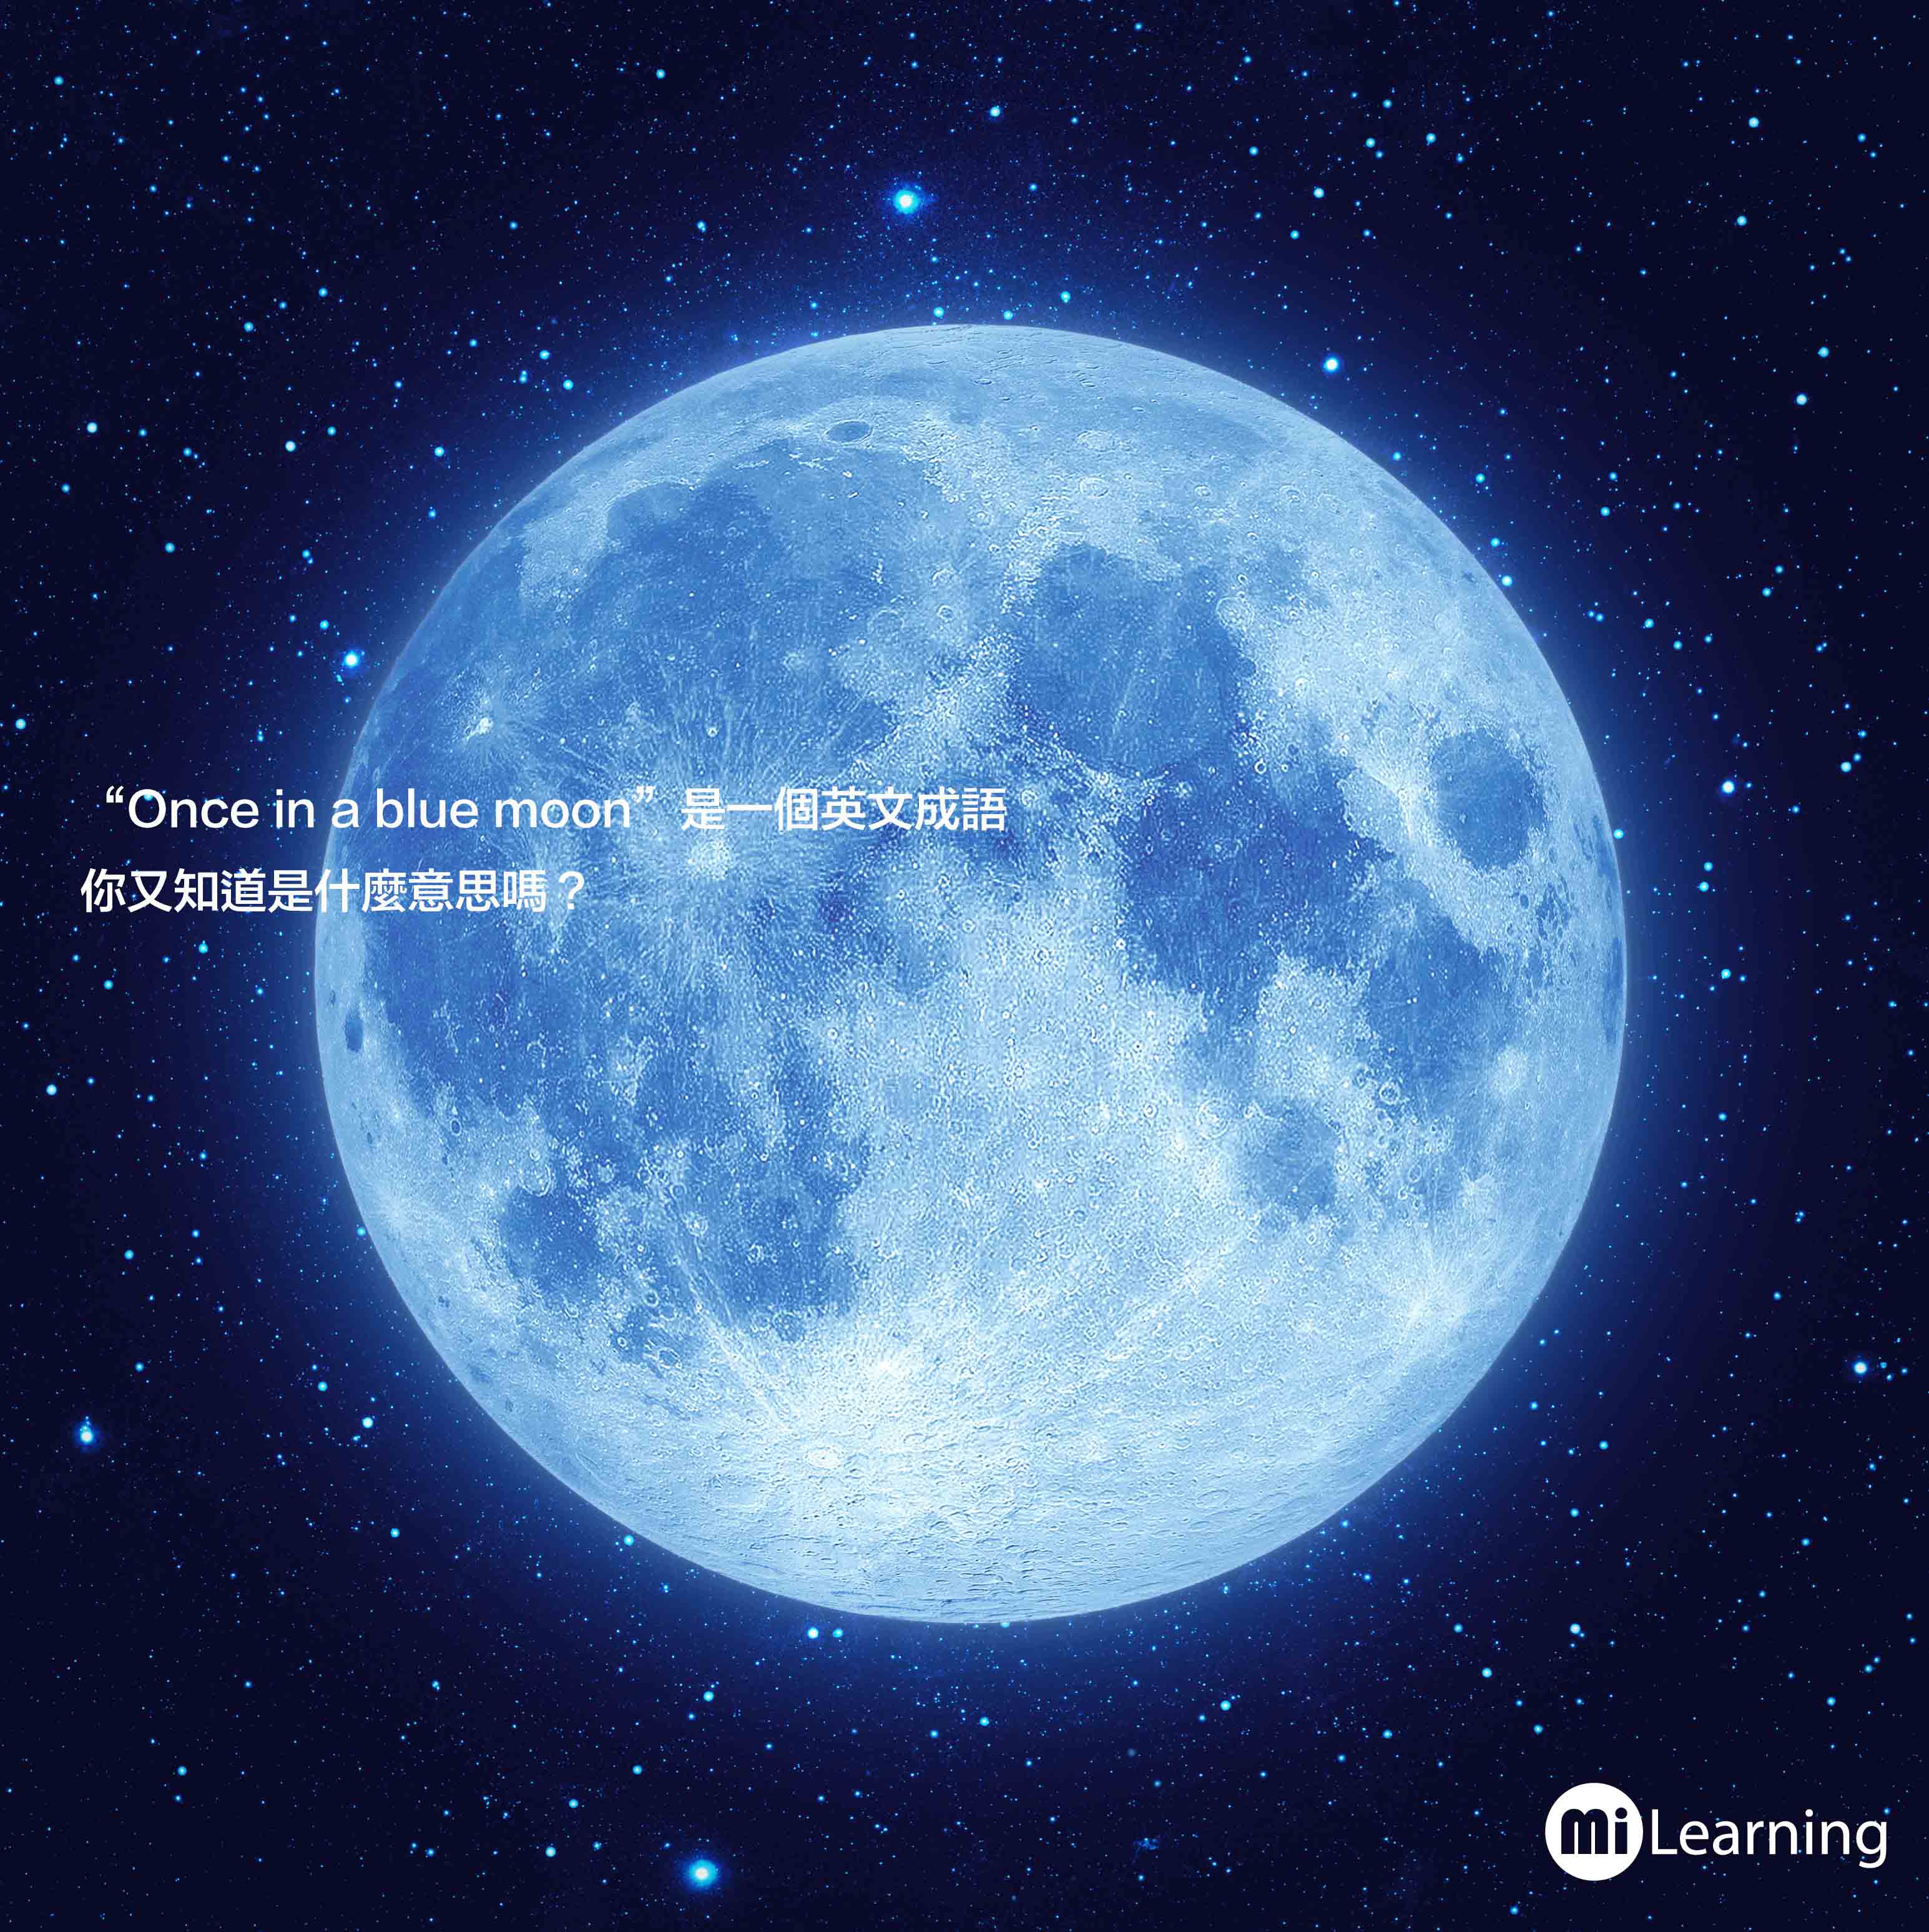 "Once in a blue moon"又是什麼意思？